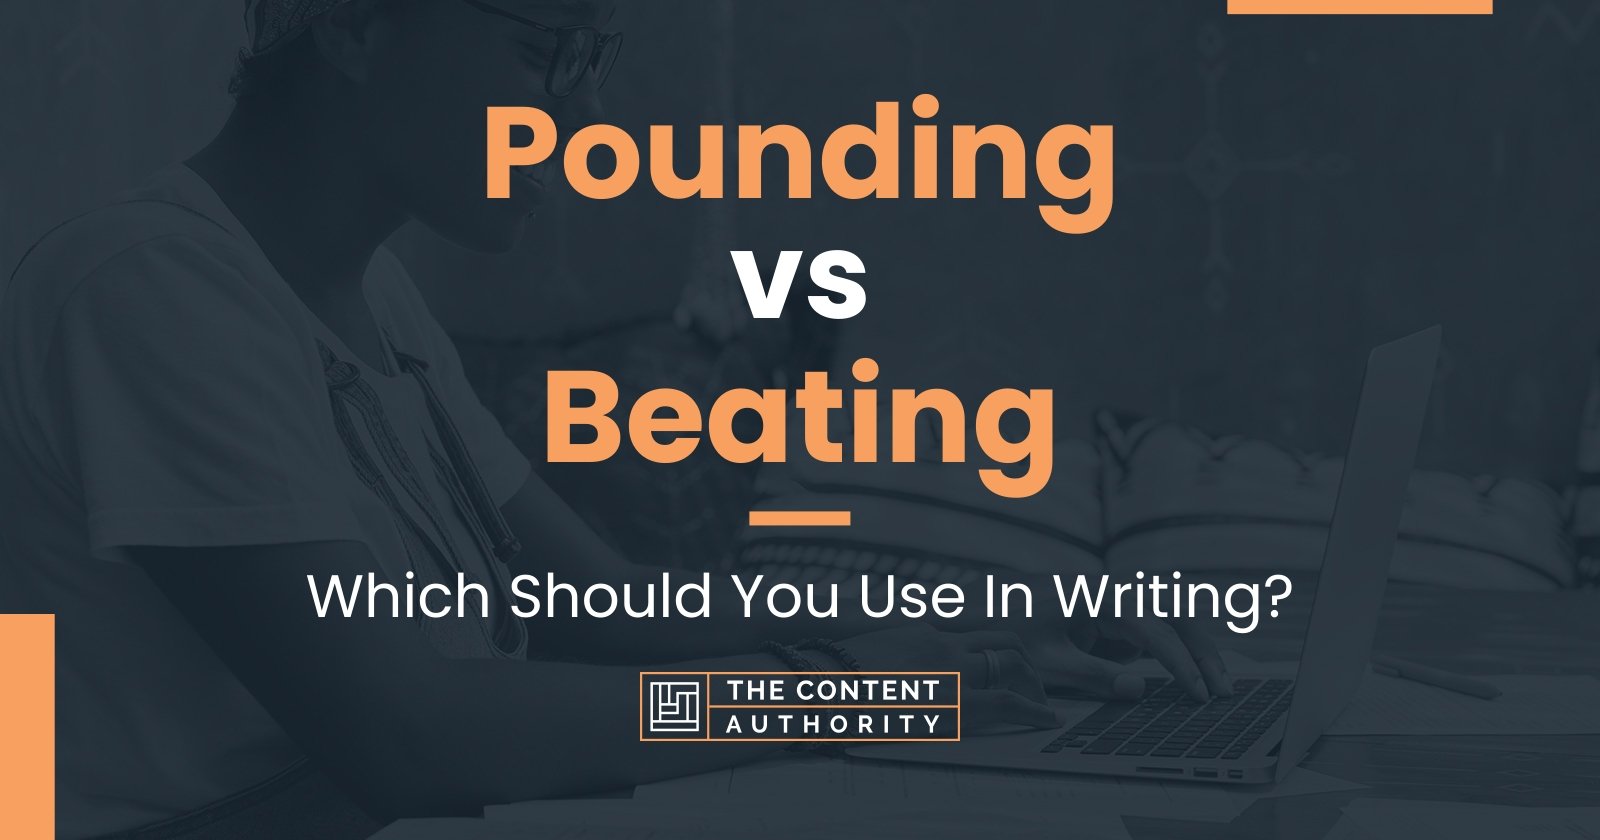 Pounding vs Beating: Which Should You Use In Writing?